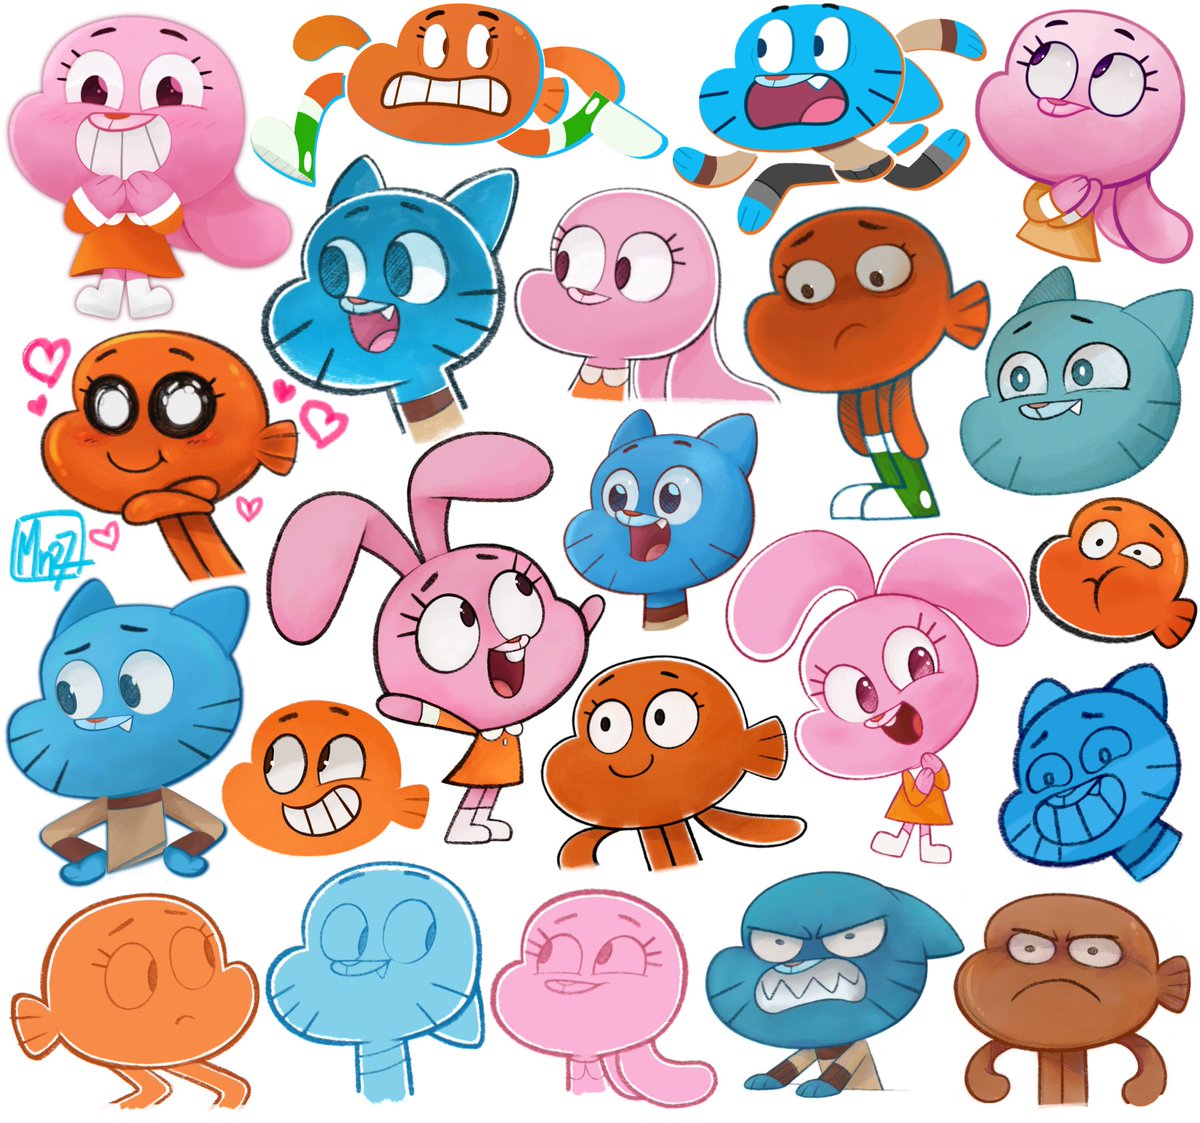 So i haven’t watched the rest of the tawog seasons, but i heard its over :c...